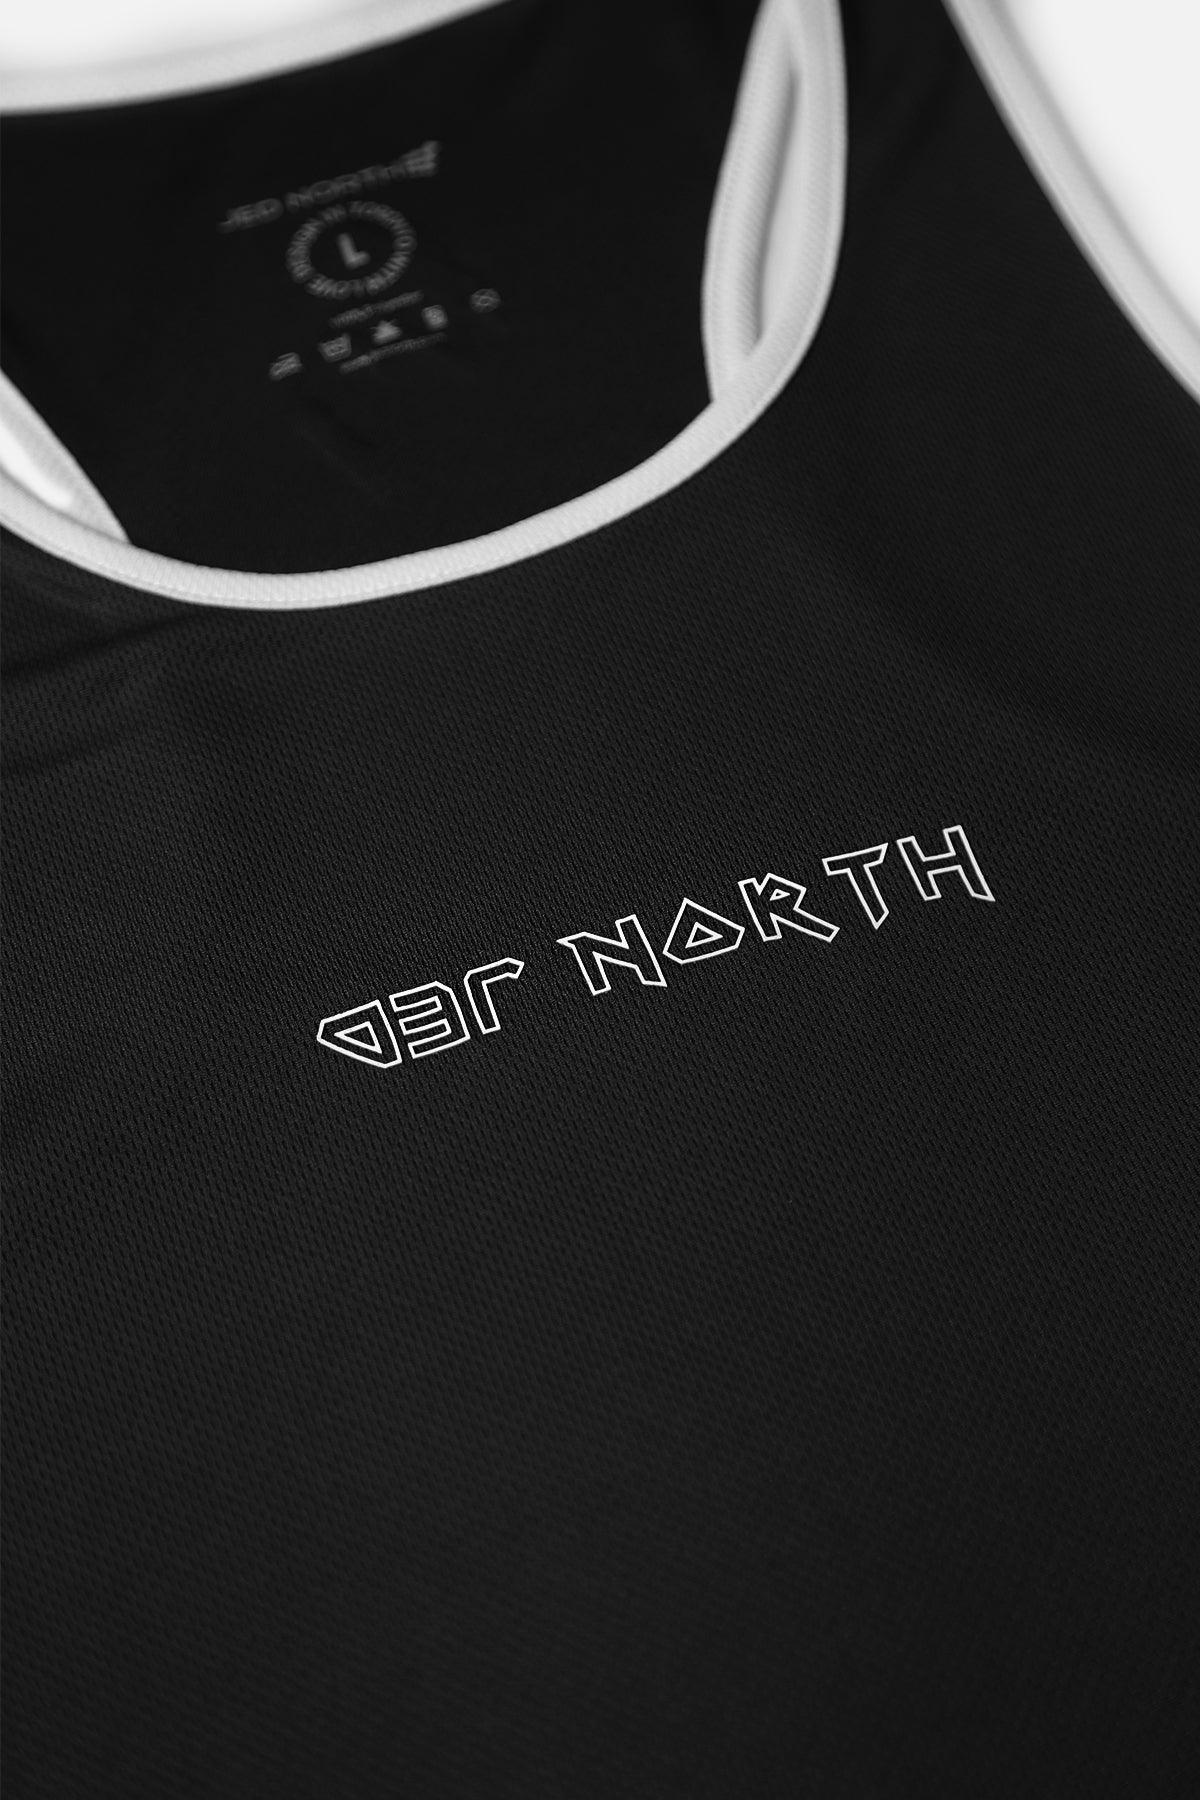 Fast-Dry Workout Stringer - Black & White - Jed North